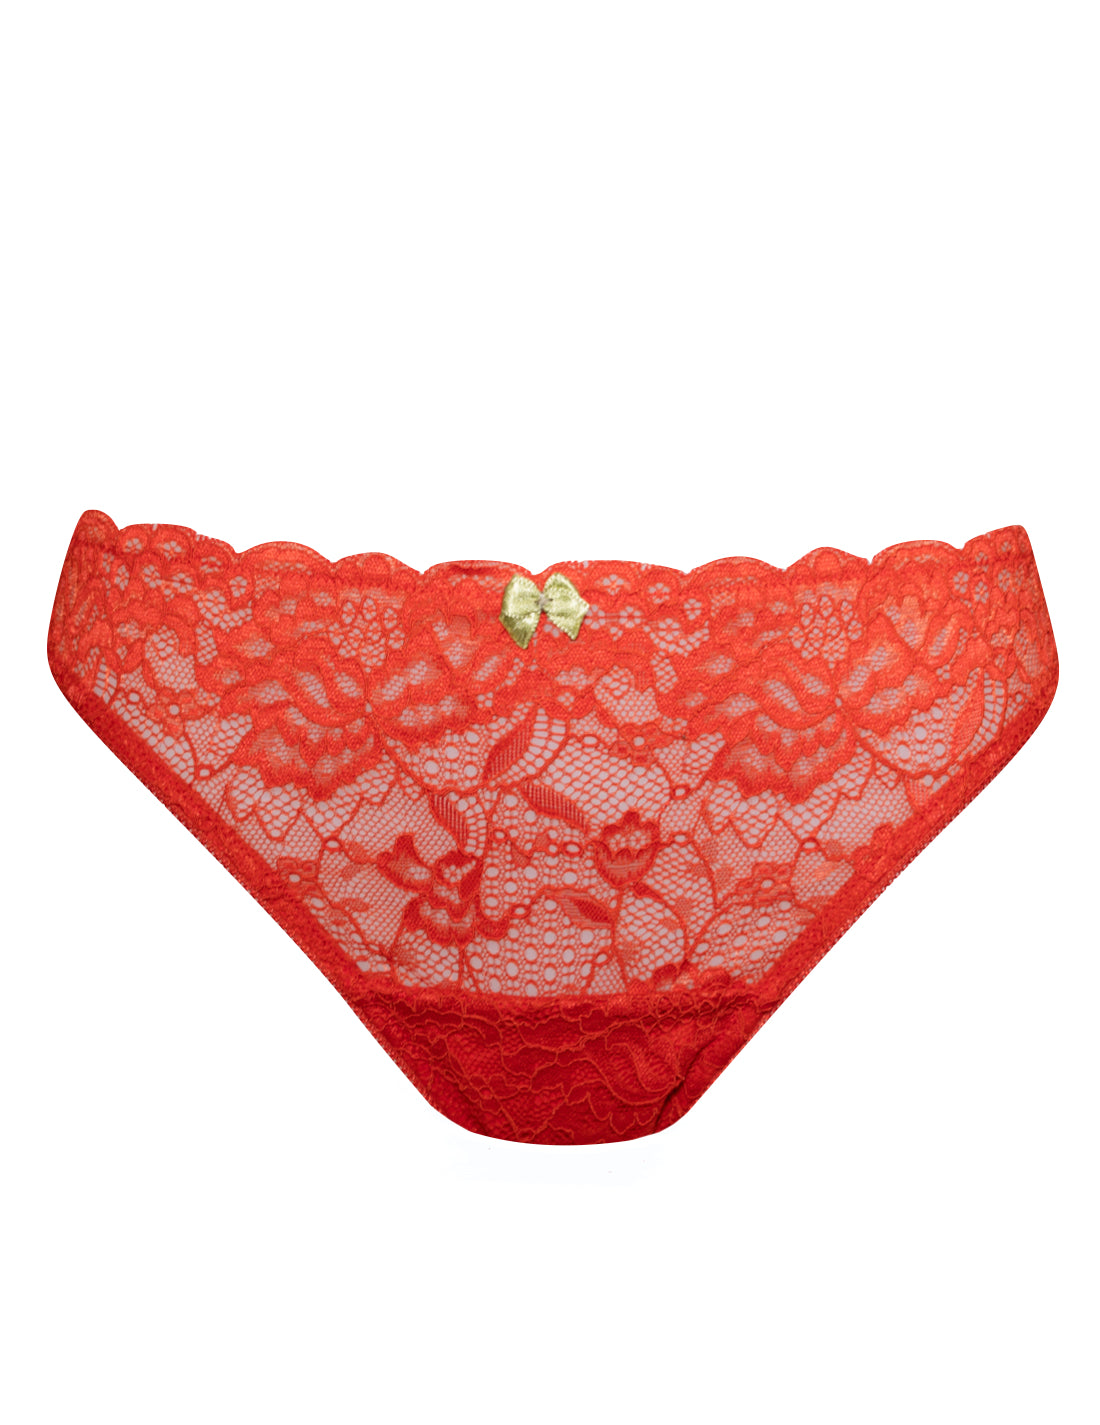 High-Waisted Knickers  Luxury Designer Comfort Cotton & Lace Panties -  Mimi Holliday